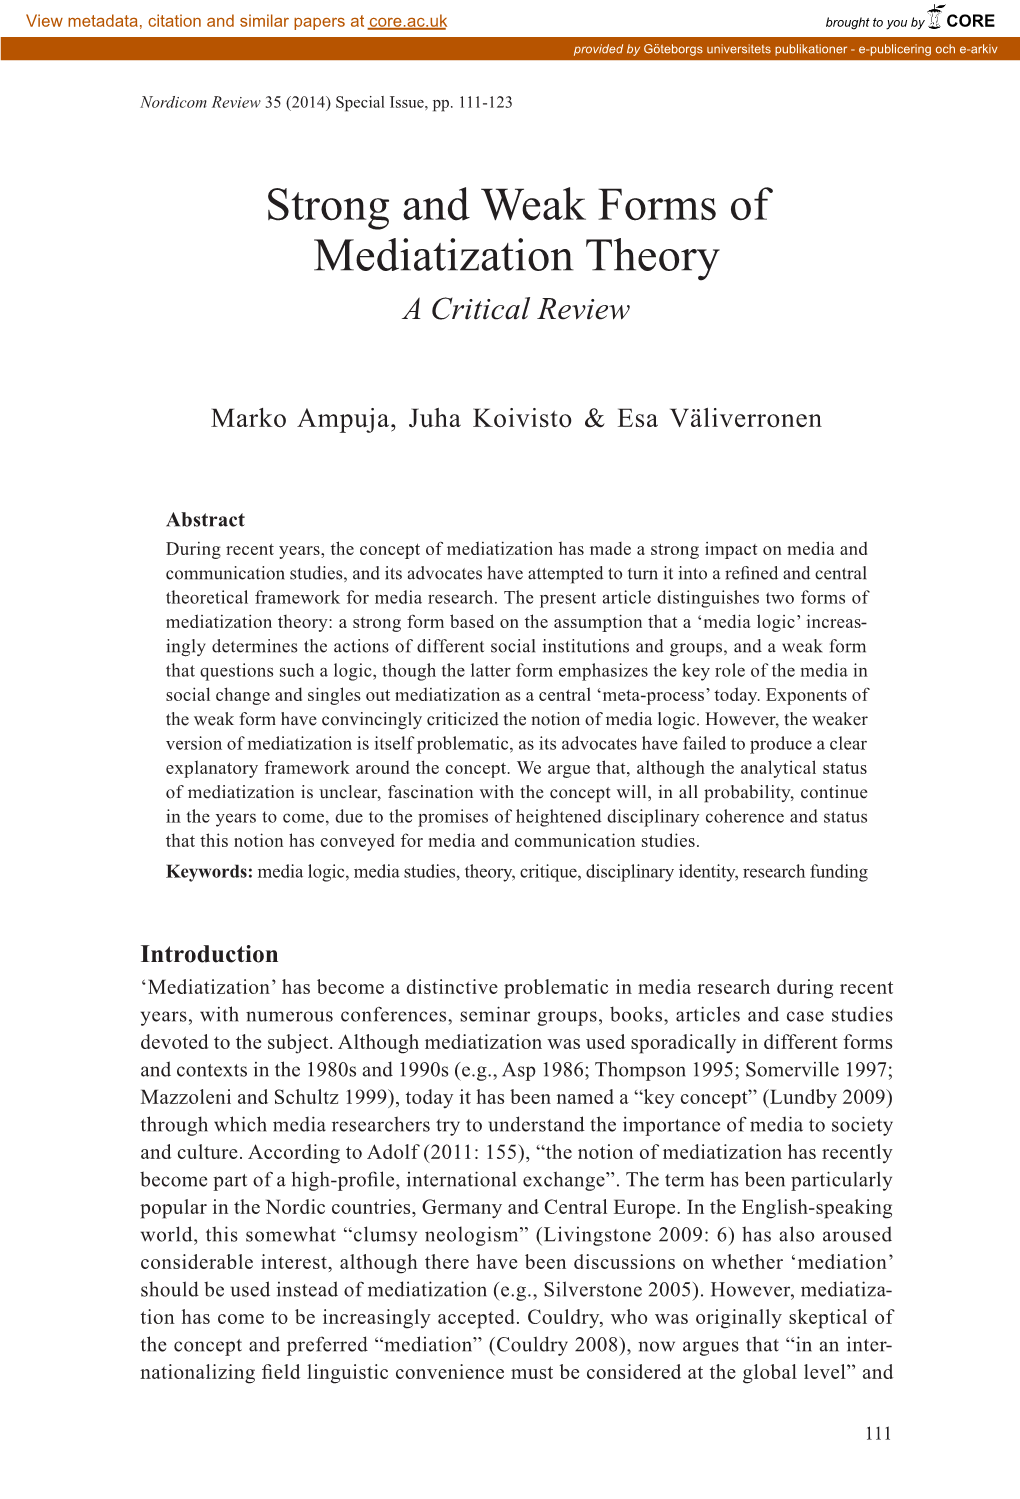 Strong and Weak Forms of Mediatization Theory a Critical Review